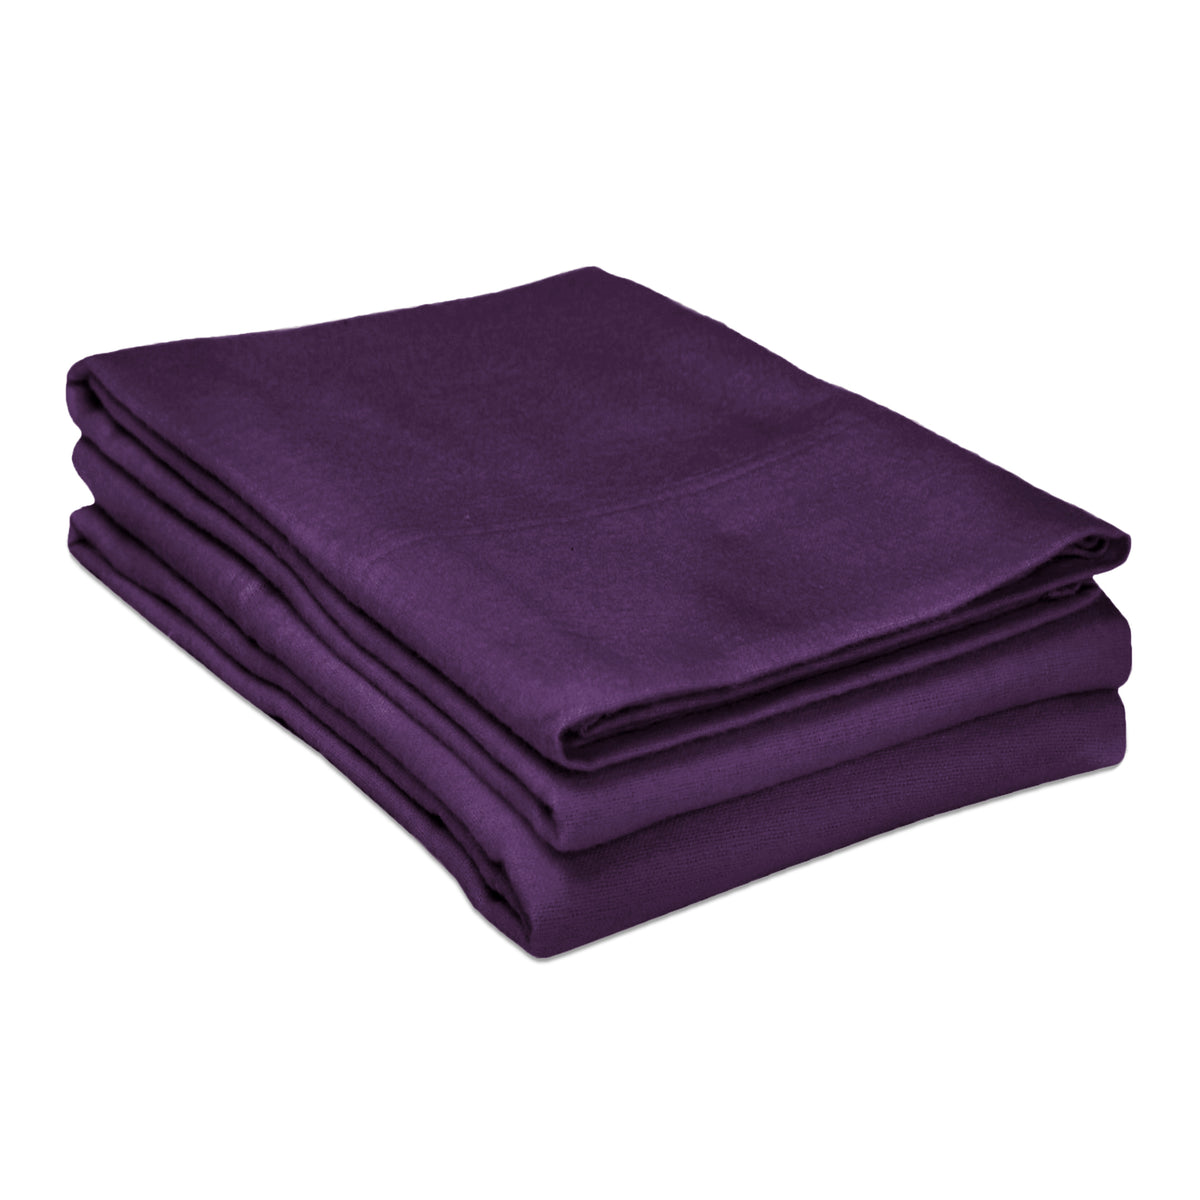 Solid Flannel Cotton Soft Fuzzy Pillowcases, Set of 2 - Purple